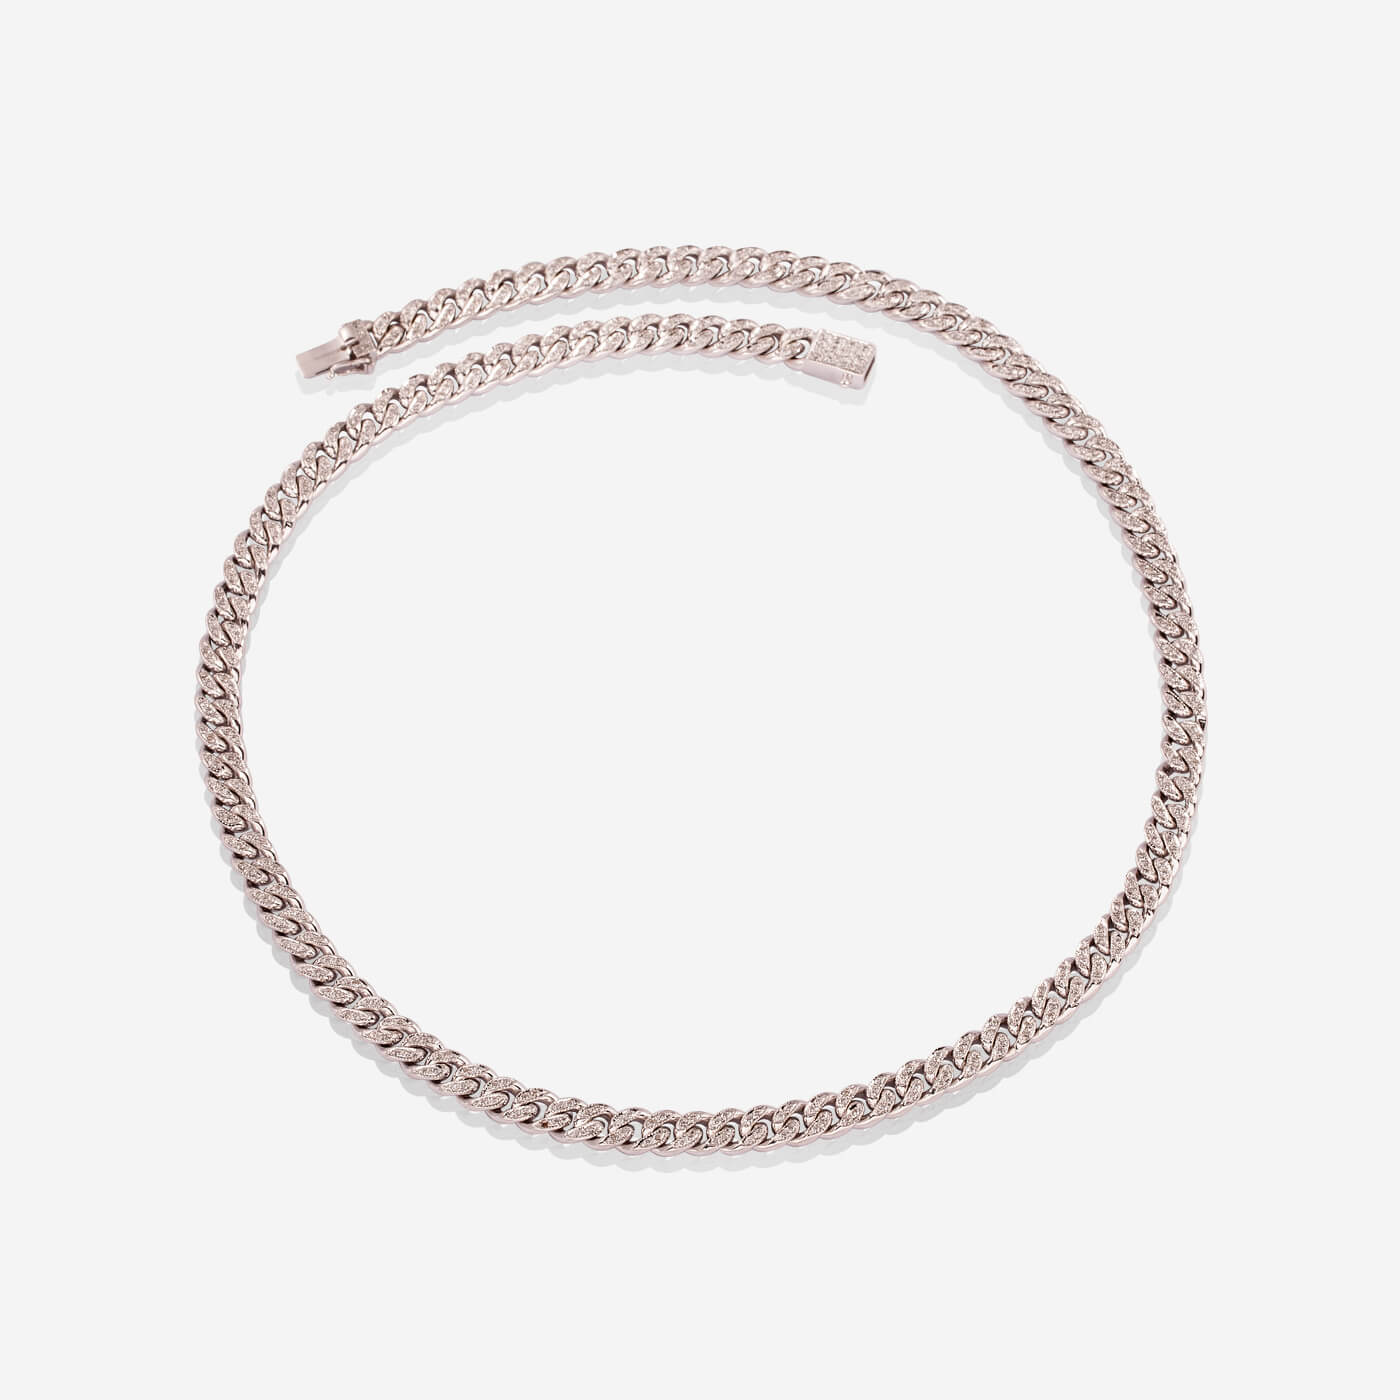 White Gold Chain Choker With Diamonds Necklace - Ref: RG03456